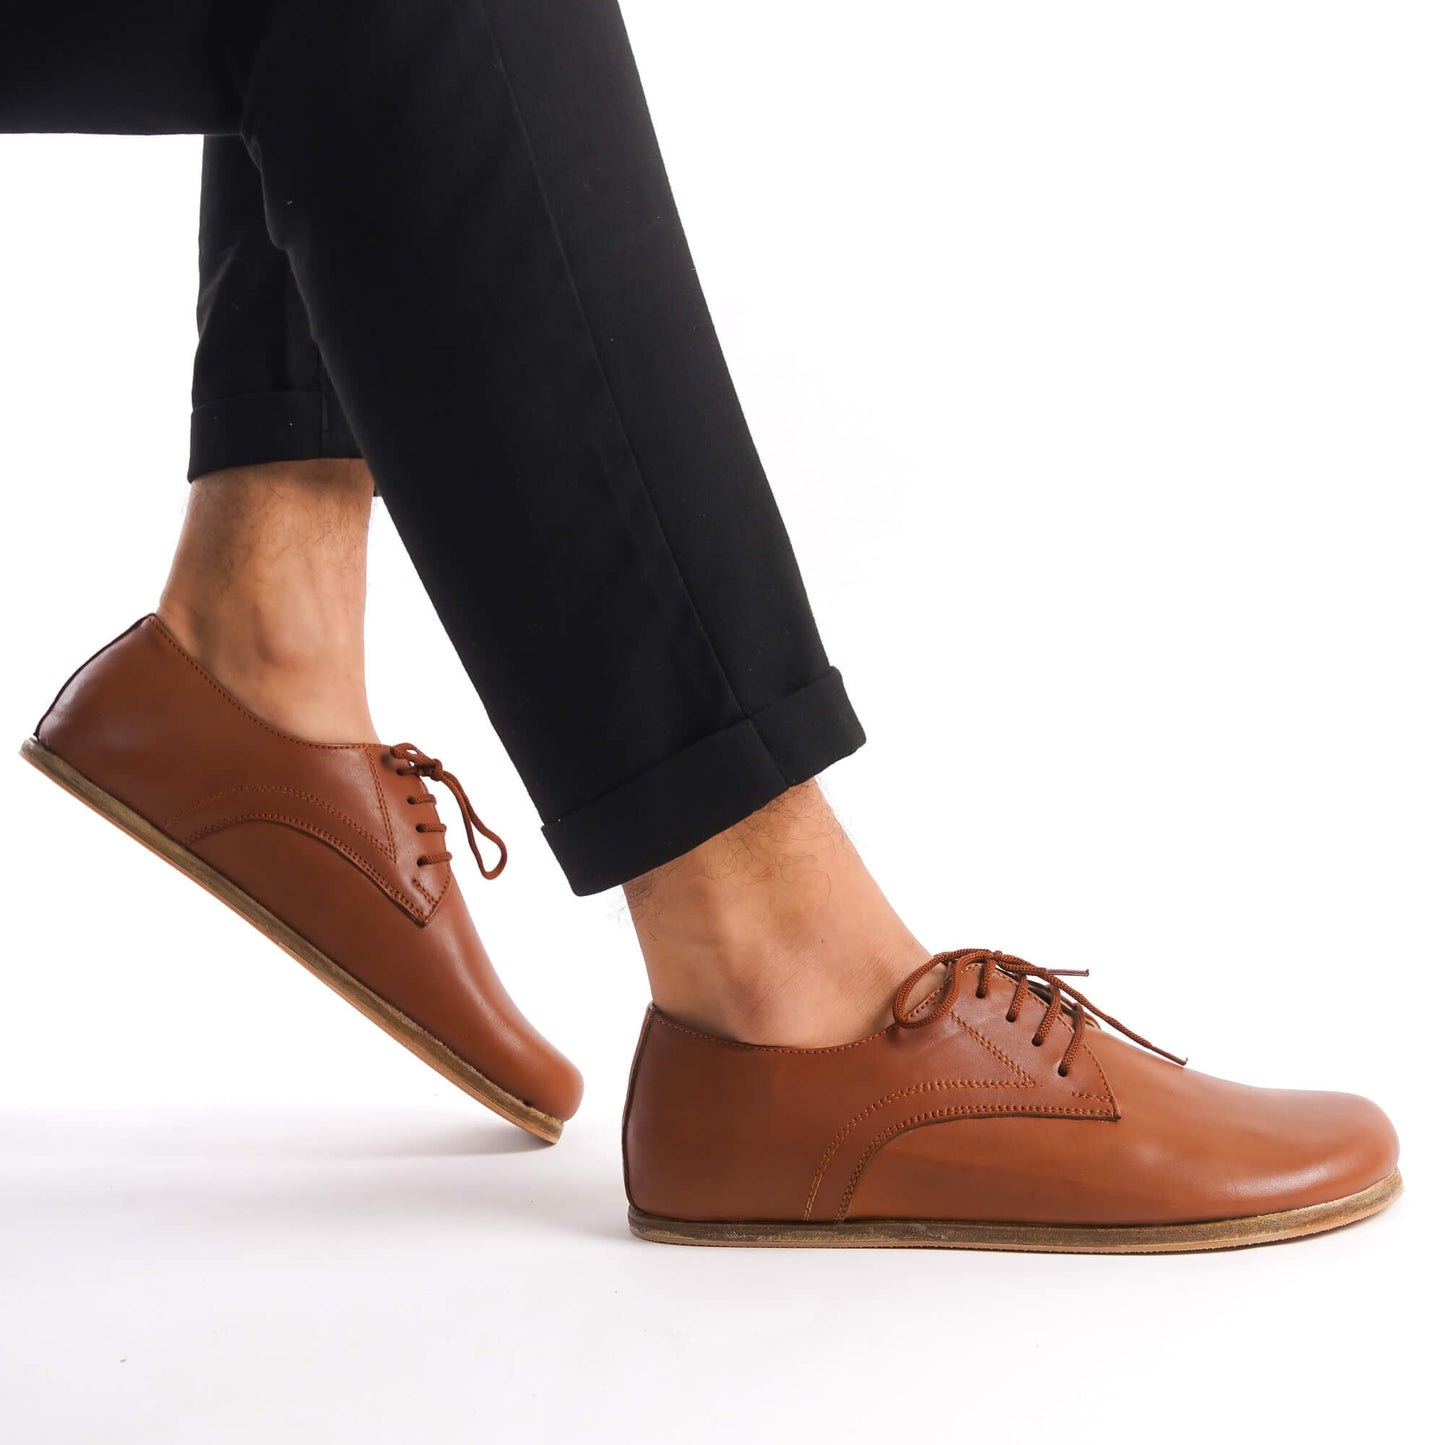 Close-up of Locris Leather Barefoot Men's Oxfords in tan brown, featuring genuine leather and minimalist design.